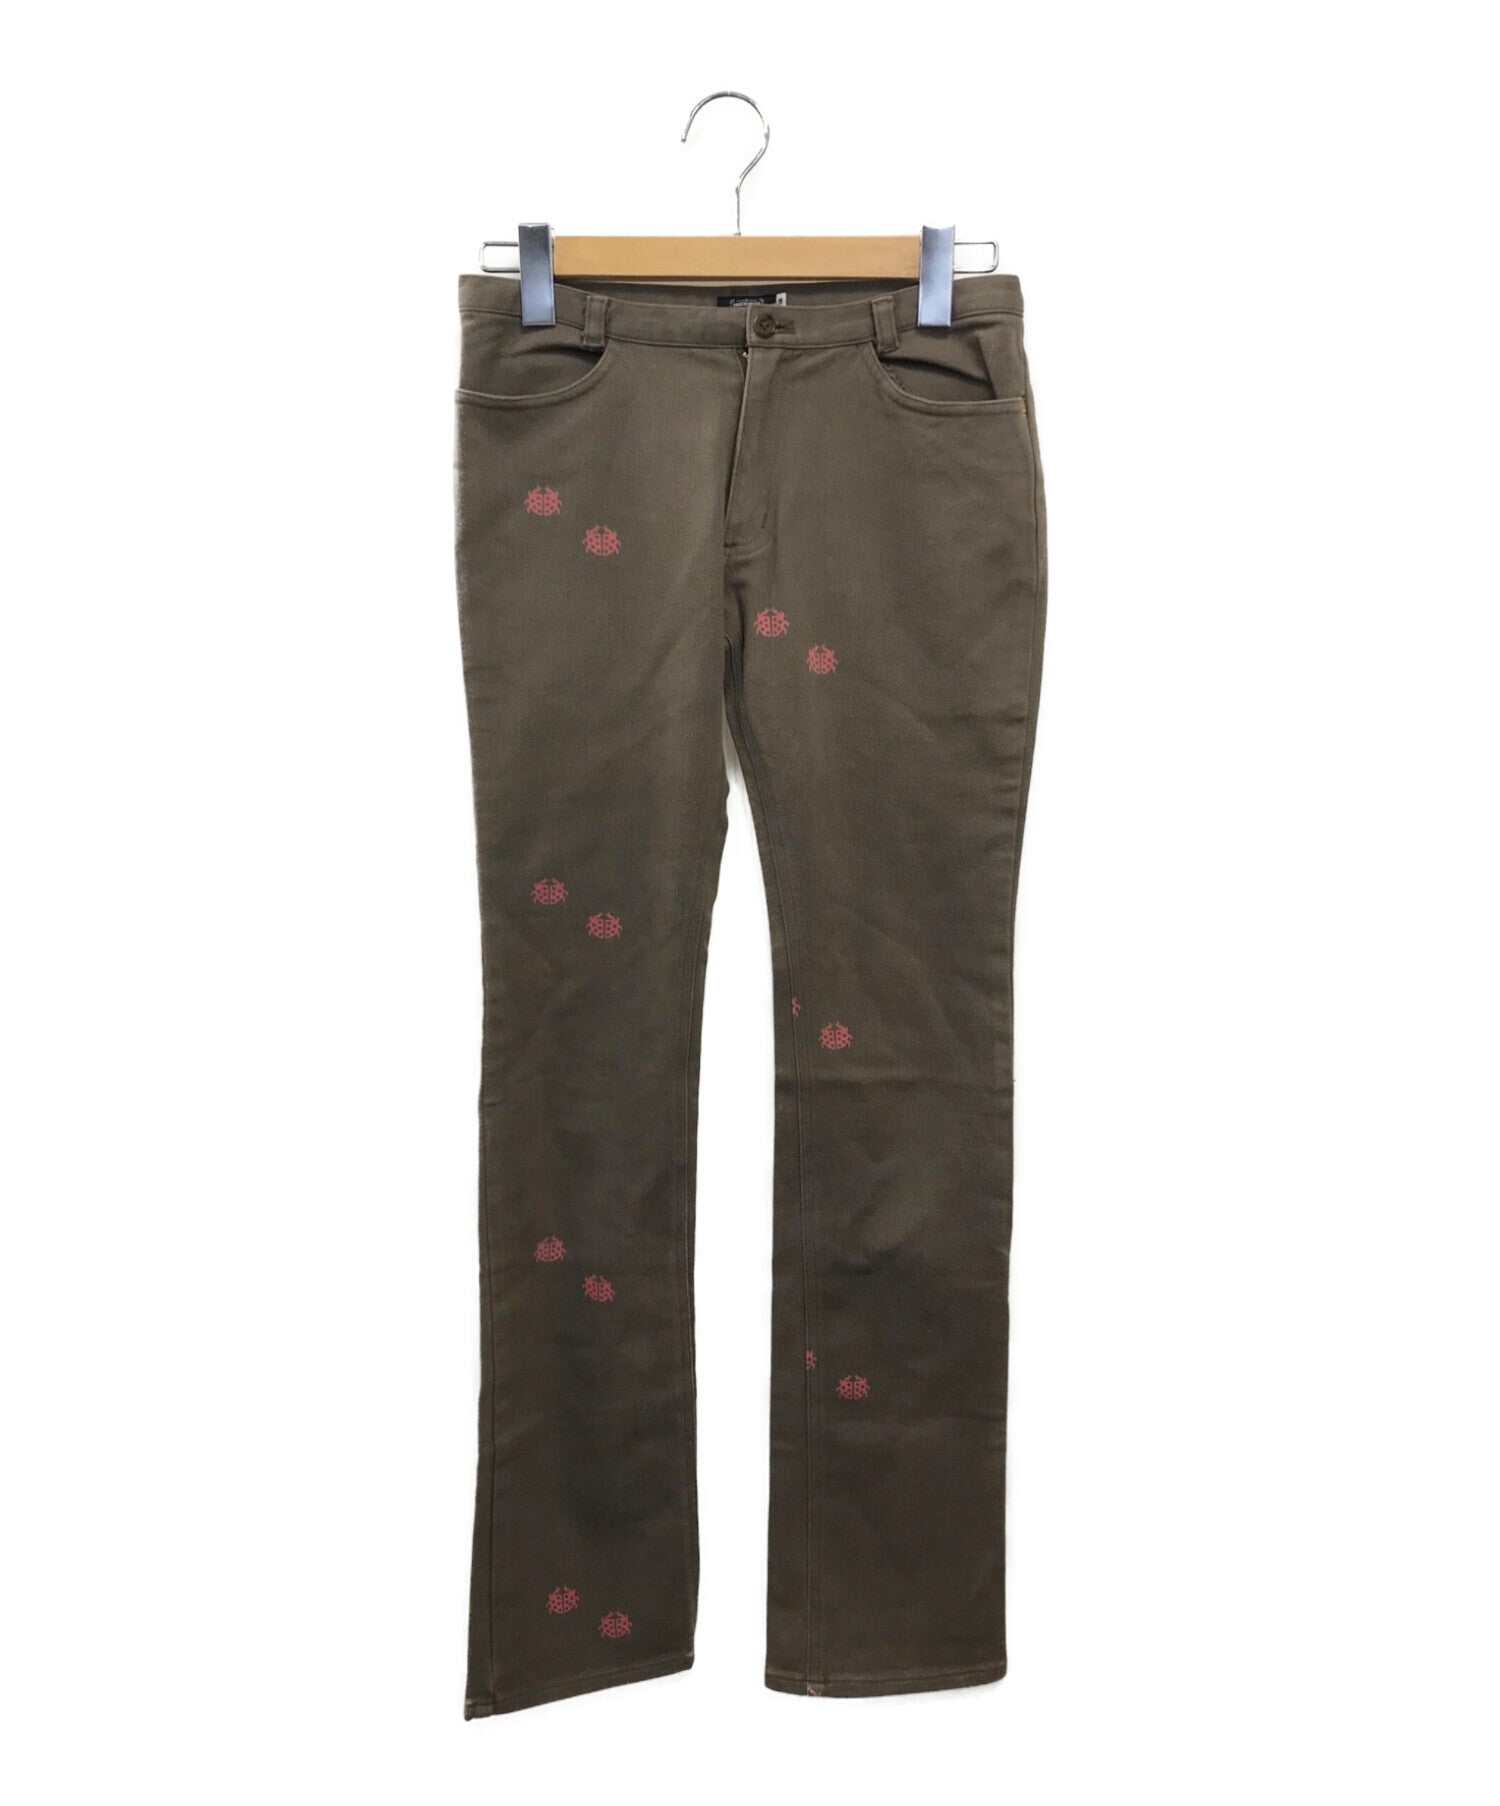 UNDERCOVER 01AW CARGO PANTS by DAVF - tracemed.com.br